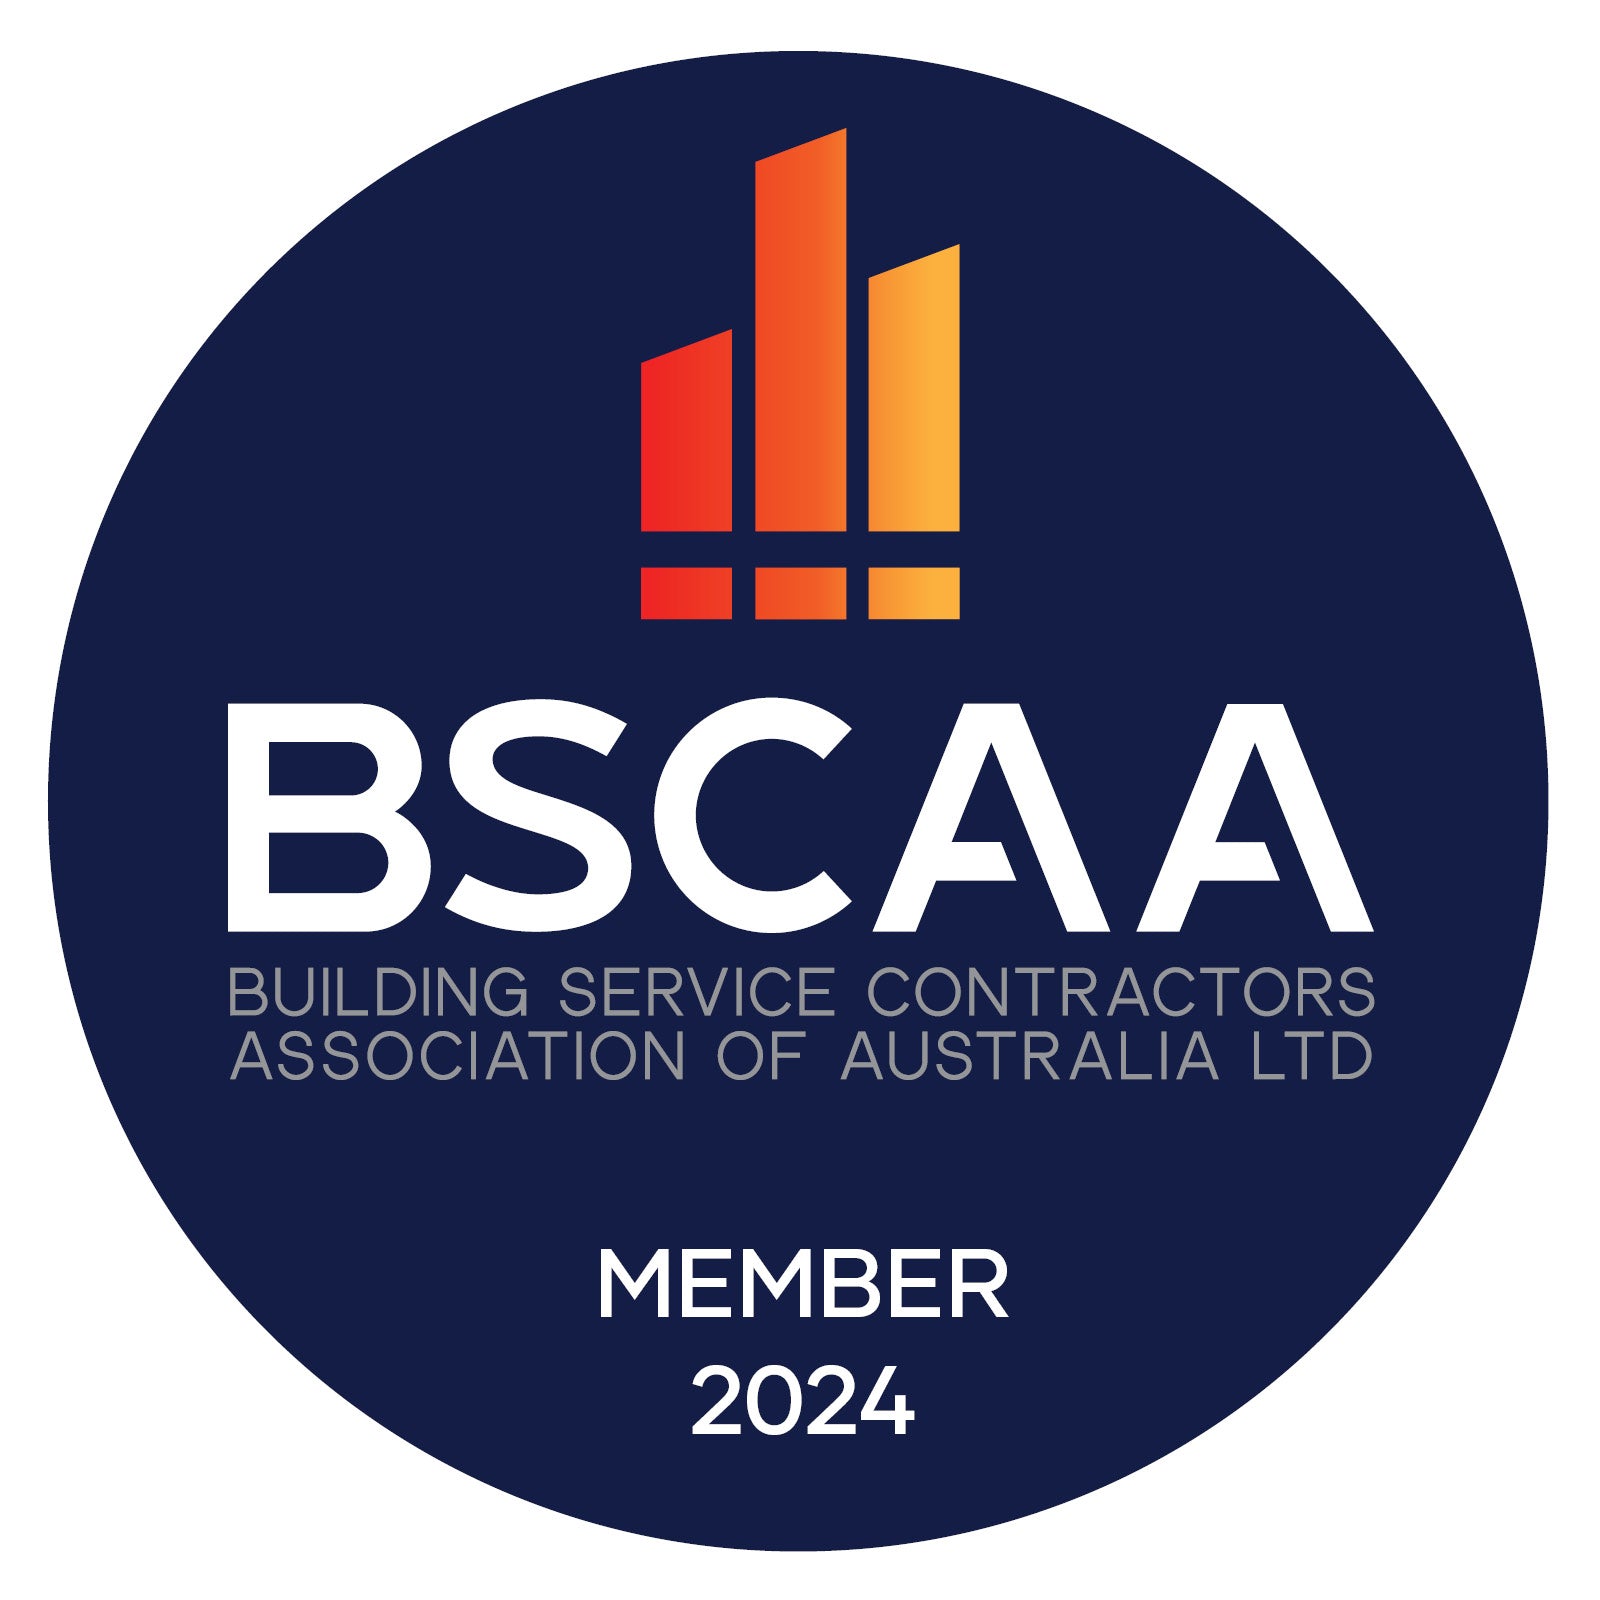 Woollahra Partners with BSCAA National